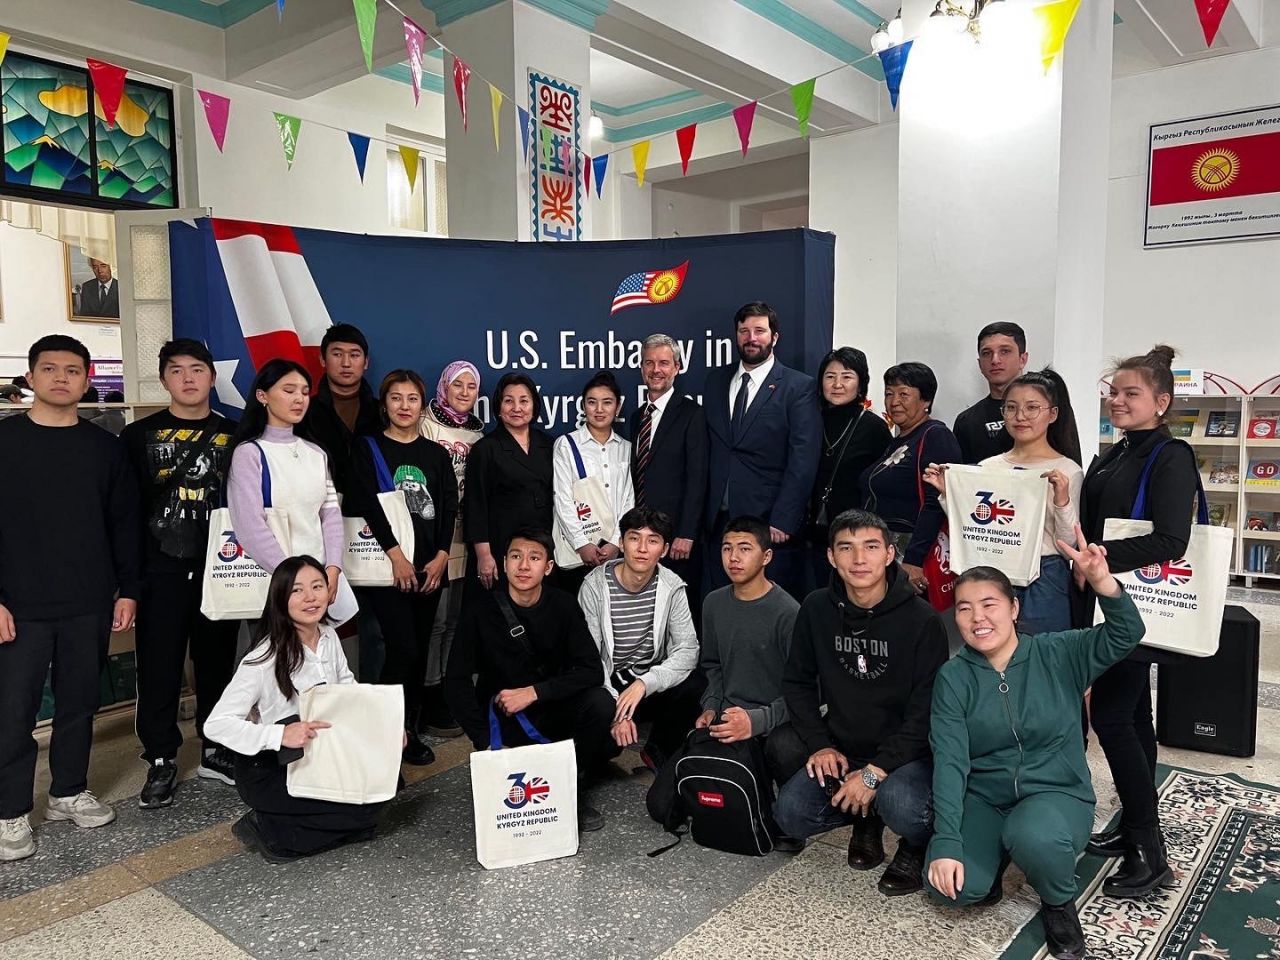 Floyd with Deputy Minister of Education and Science of the Kyrgyz Republic, Deputy Chargé Dàffaires of the U.S. Embassy in Bishkek, and Kyrgyz students at the IEW Fair